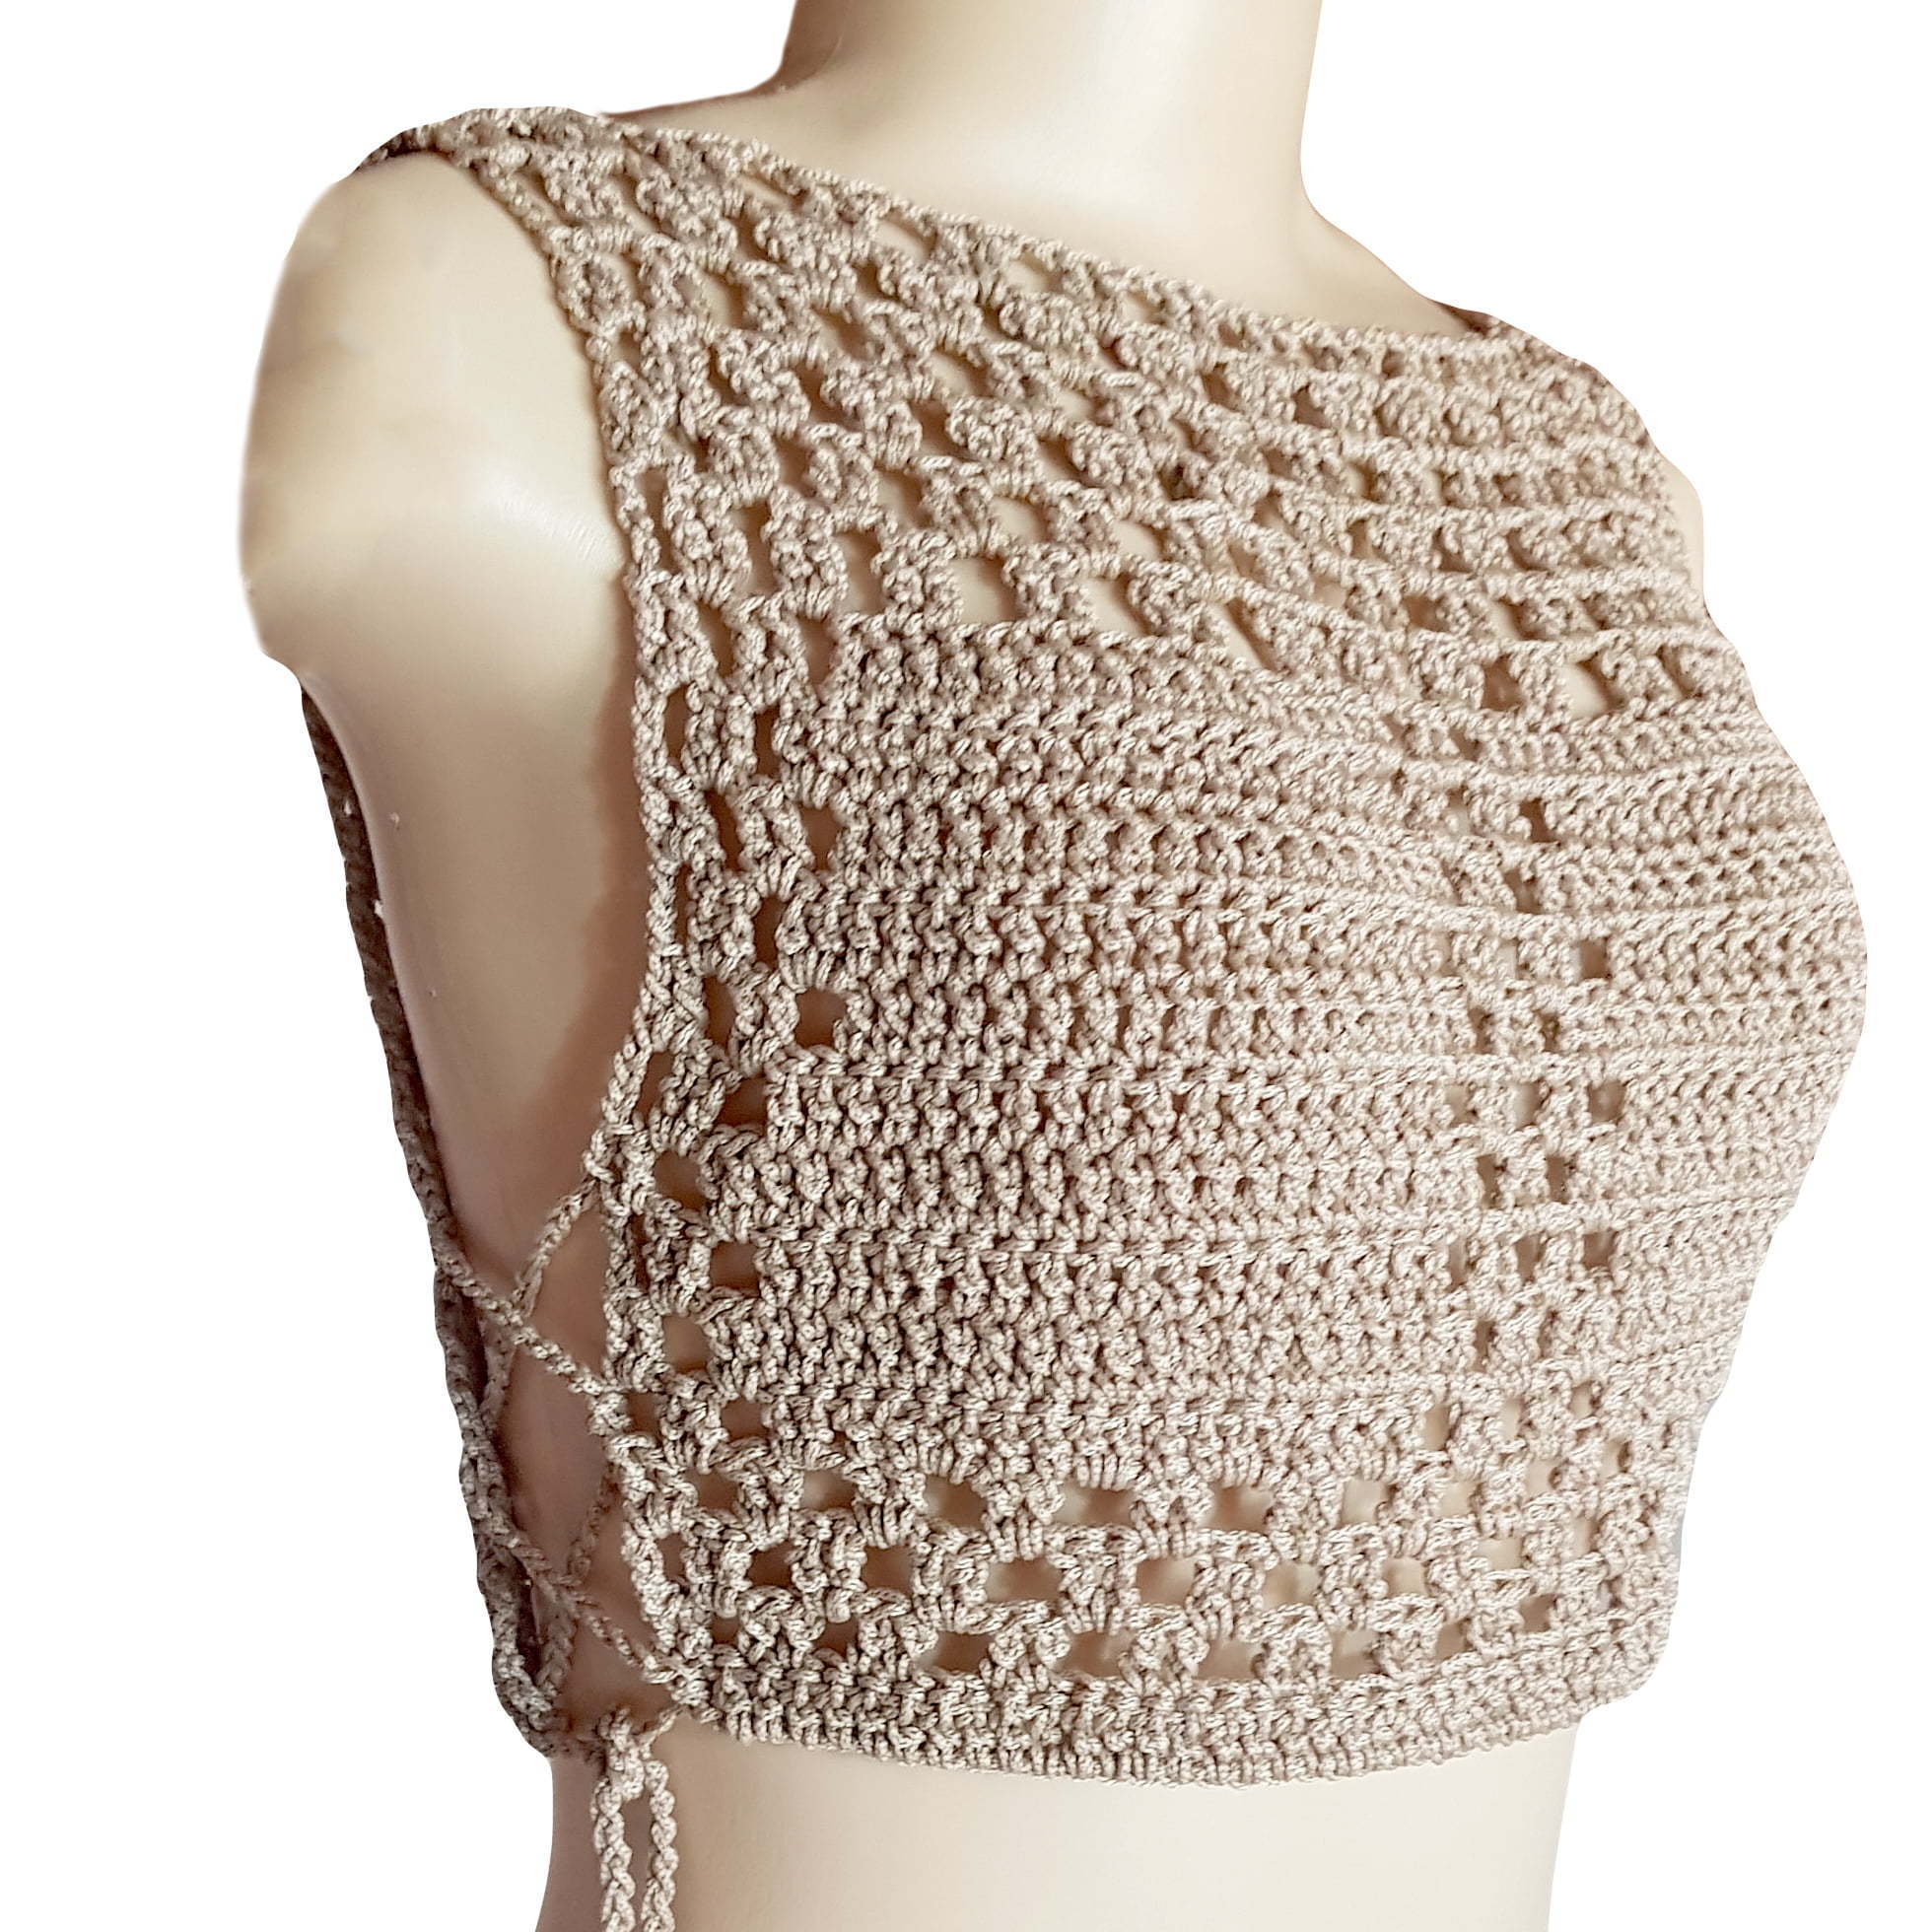 Nude crochet sexy handmade crop top 5 this crochet top was created with comfort and uniqueness in mind. Handmade top created to be a unique one of a kind clothing item. It is perfect for several sizes as you can tie-up the sides looser or tighter for a perfect and comfortable fit. A great crochet top with a modern color. Great as a casual top or with smart pants or a skirt, accessories and shoes for a more smart casual occasion.